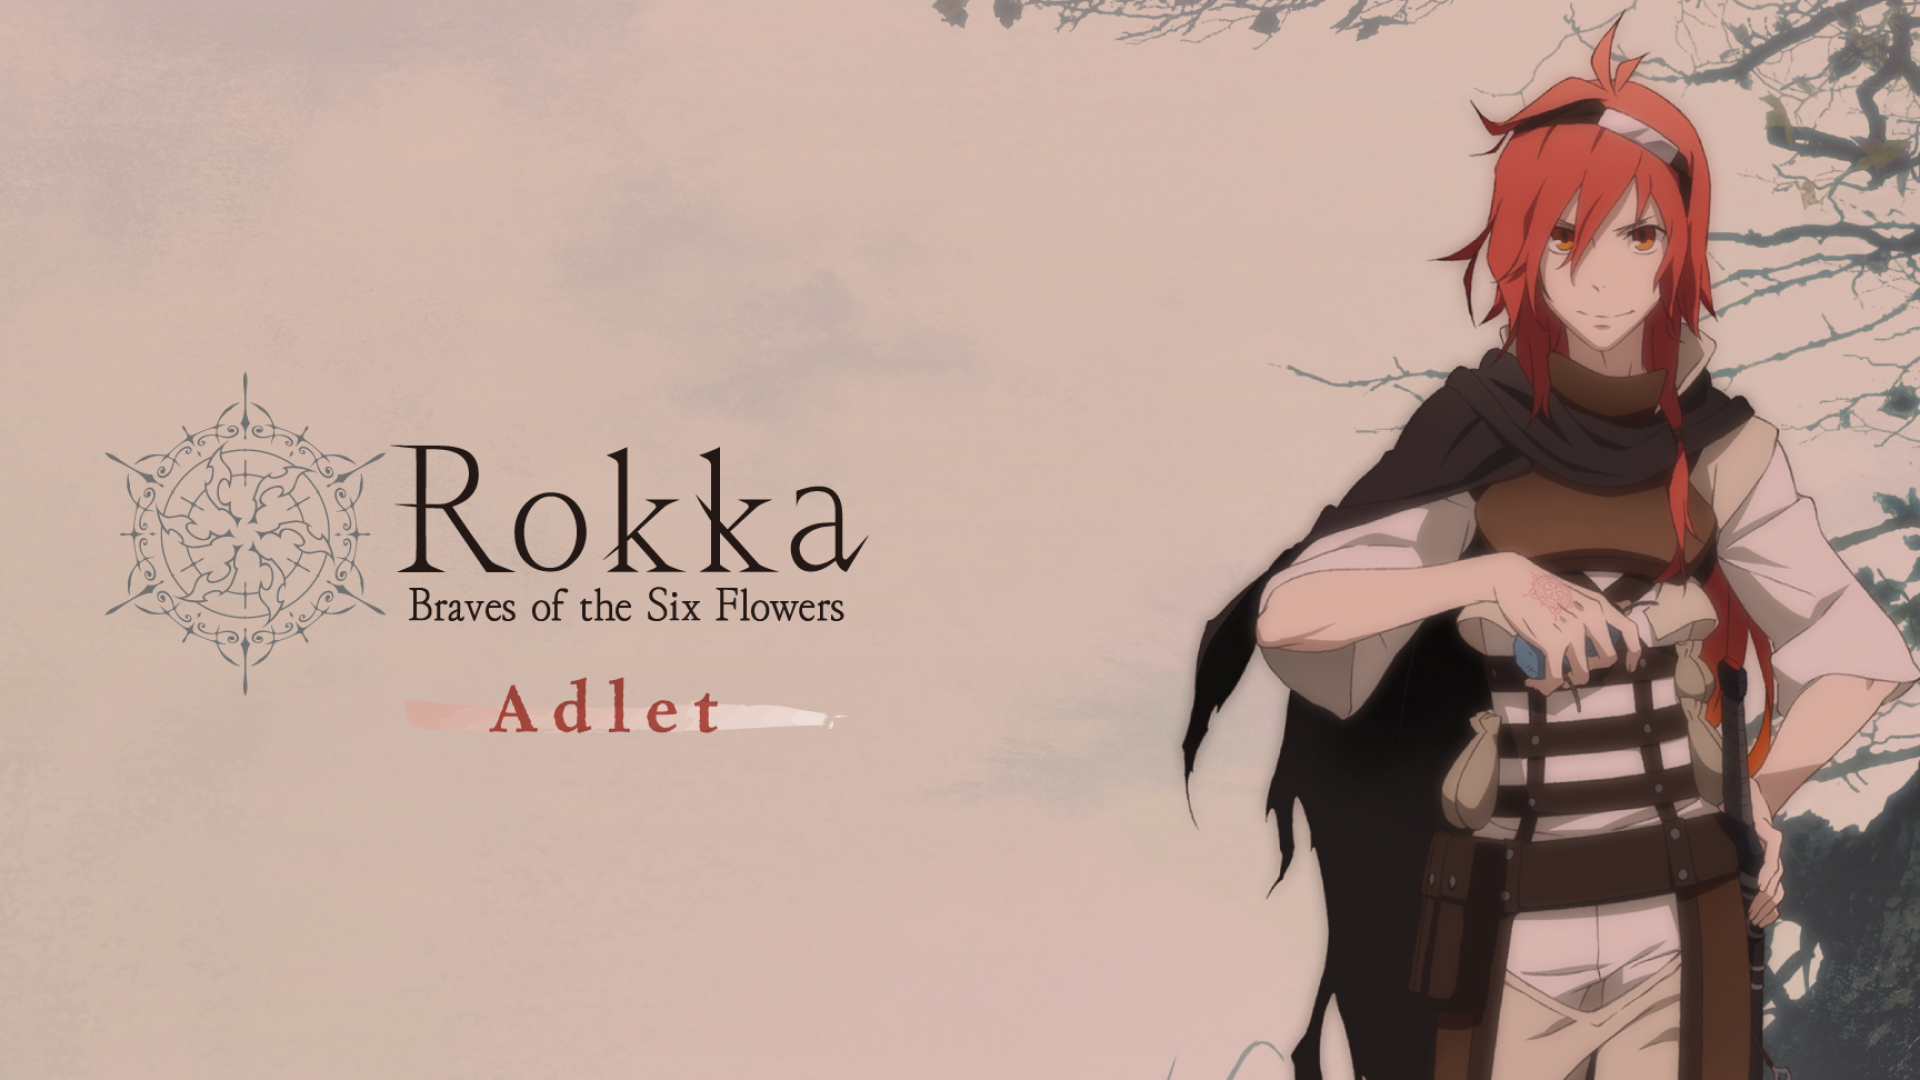 1920x1080 70+ Rokka: Braves of the Six Flowers HD Wallpapers and Backgrounds